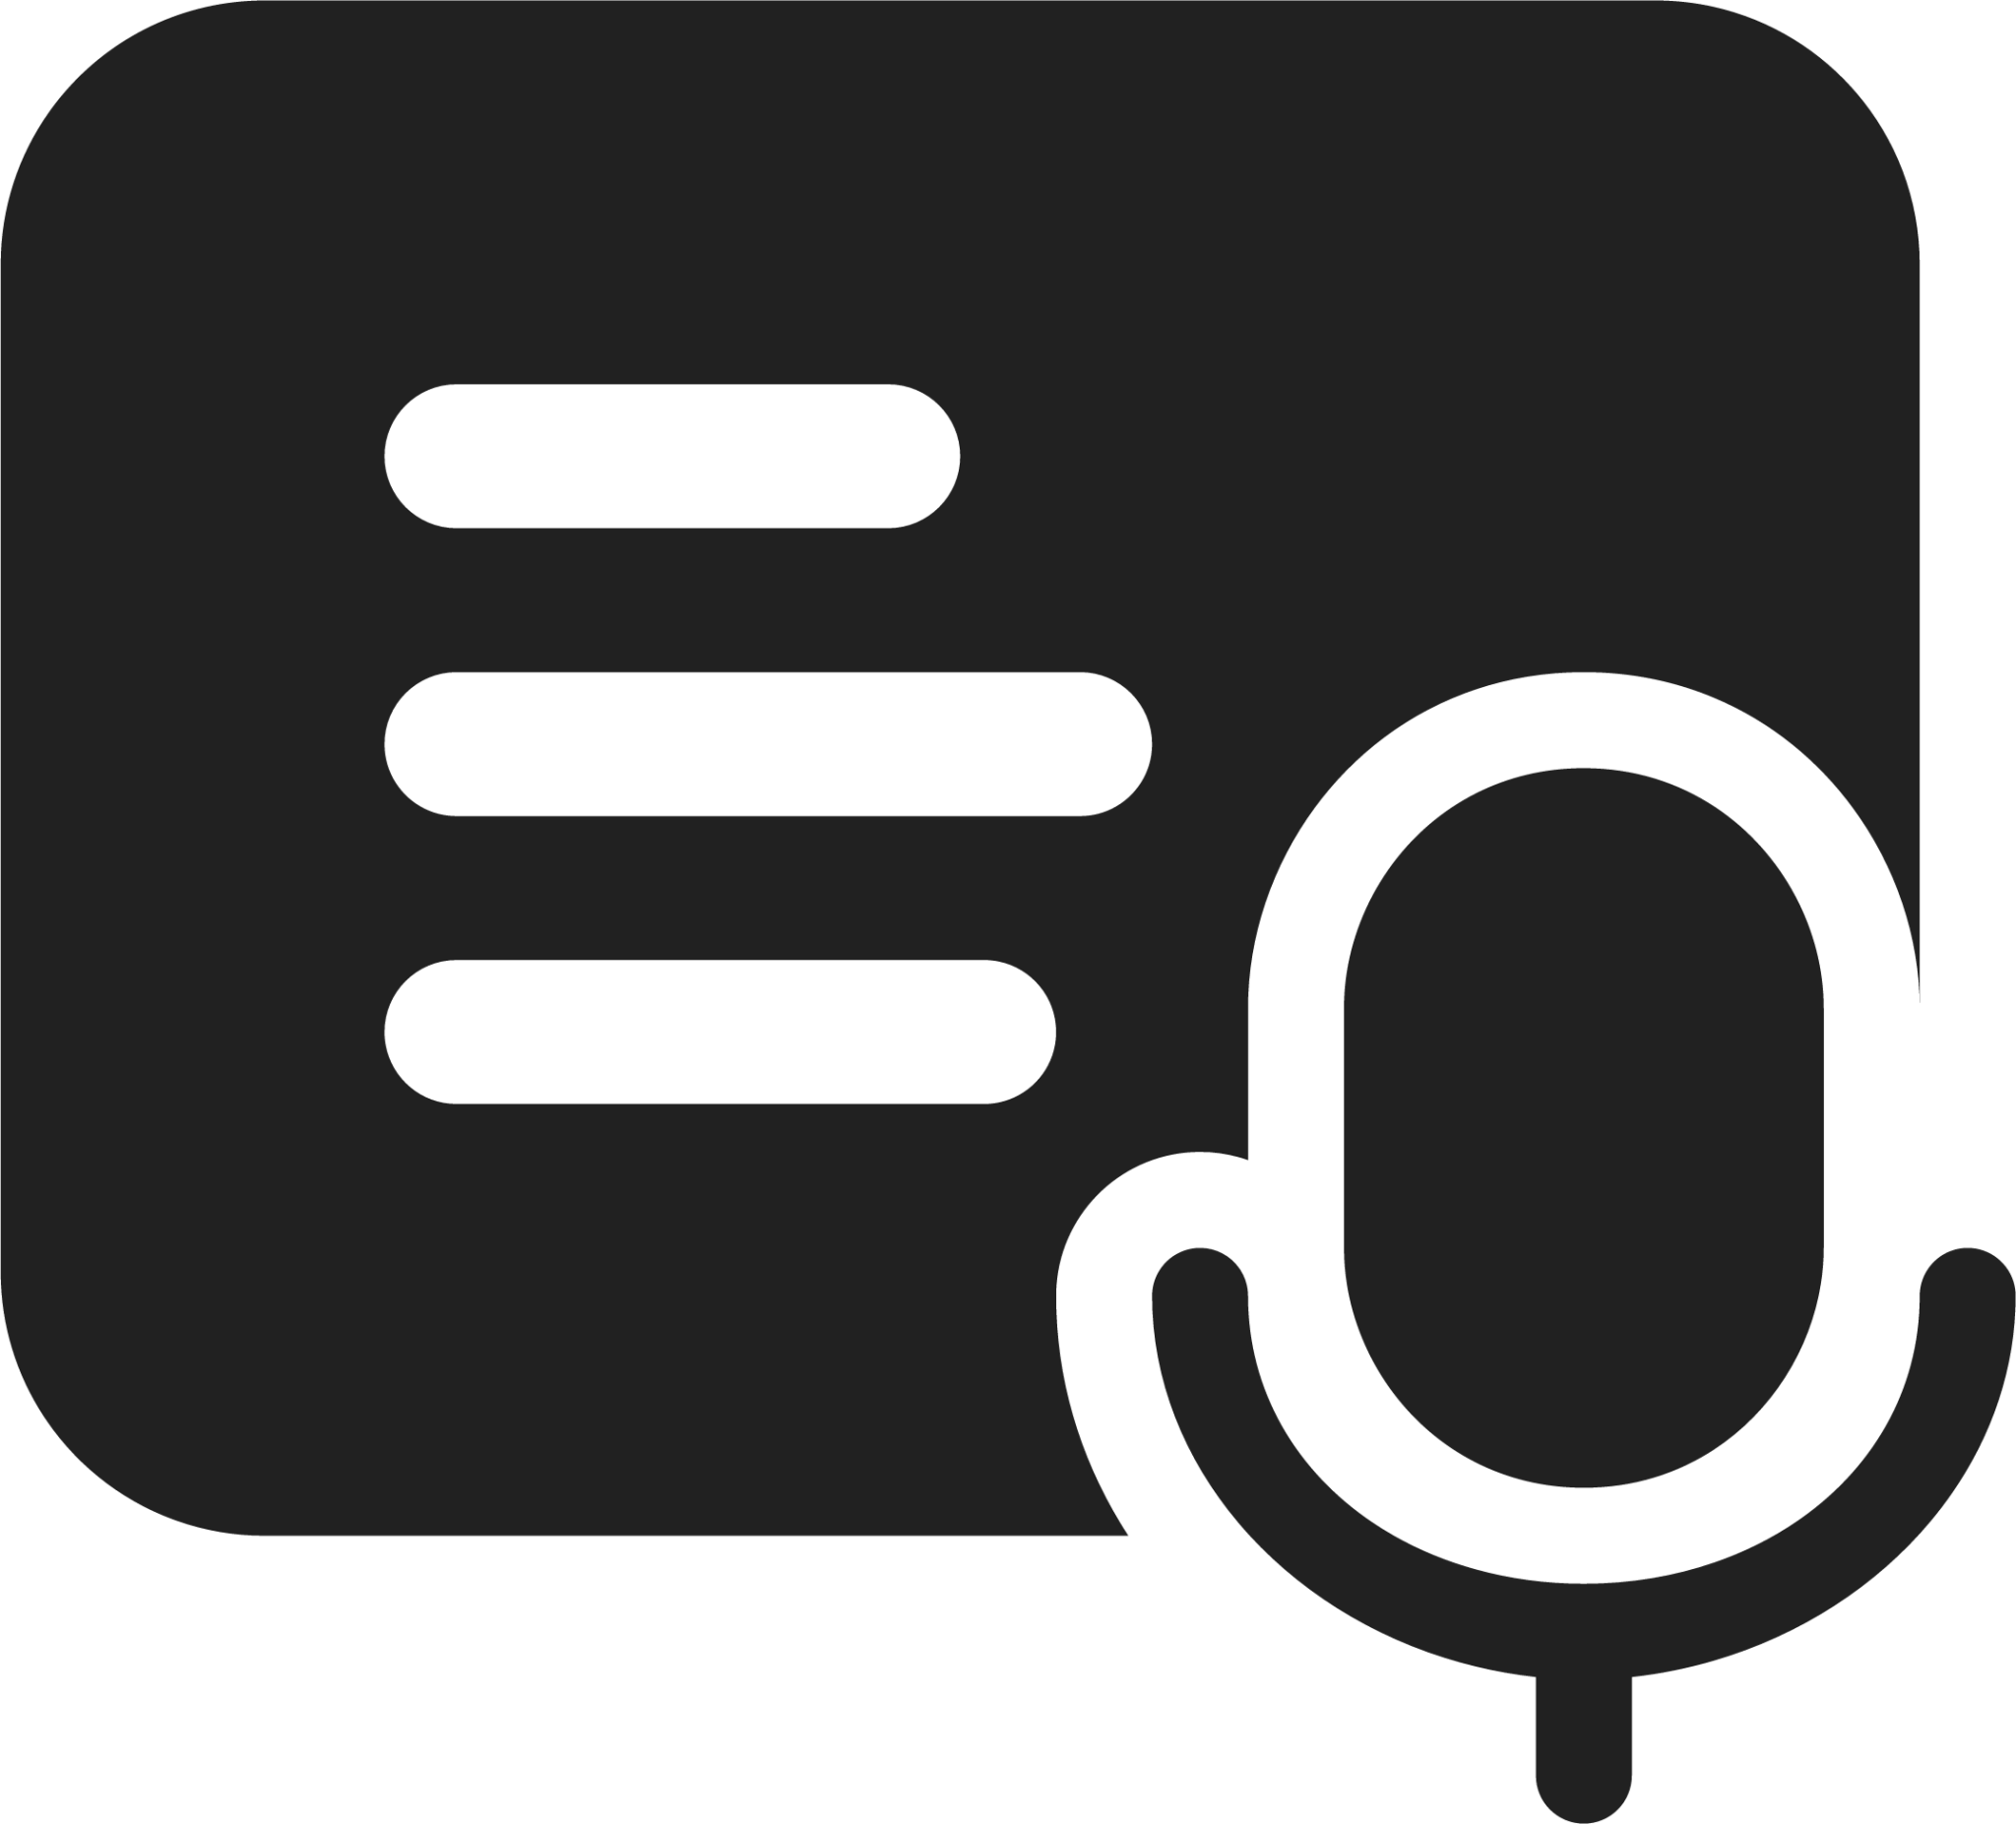 Slide Microphone icon